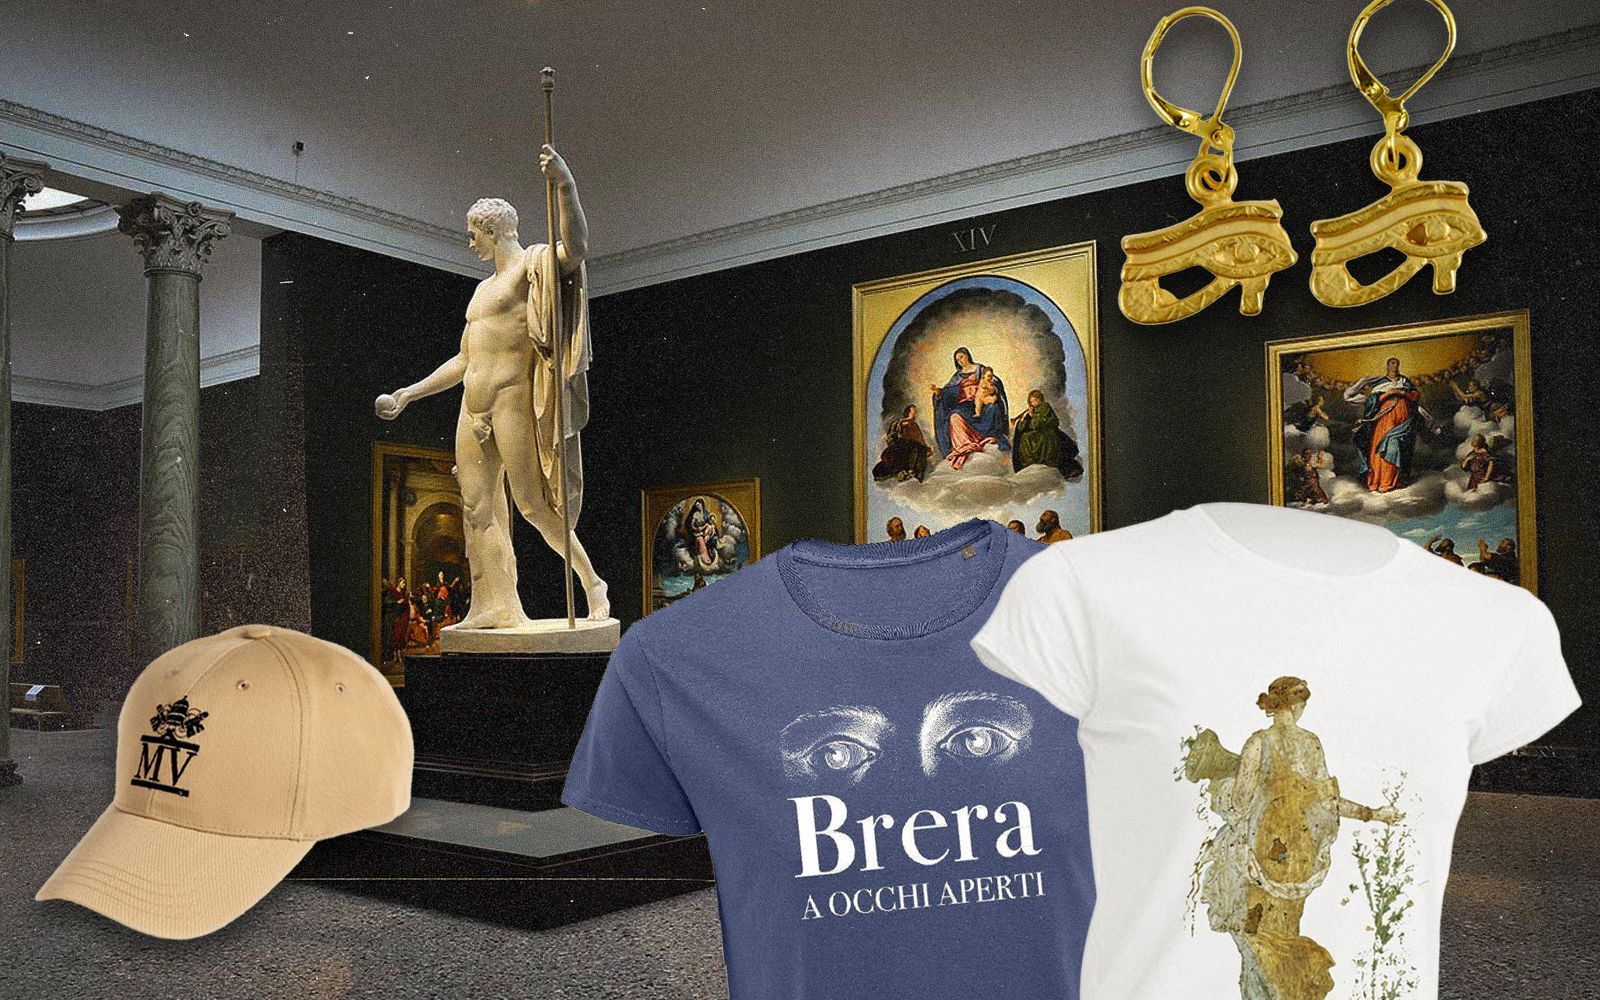 The fantastic world of Italian museum merch From simple souvenirs to hallmarks of a community